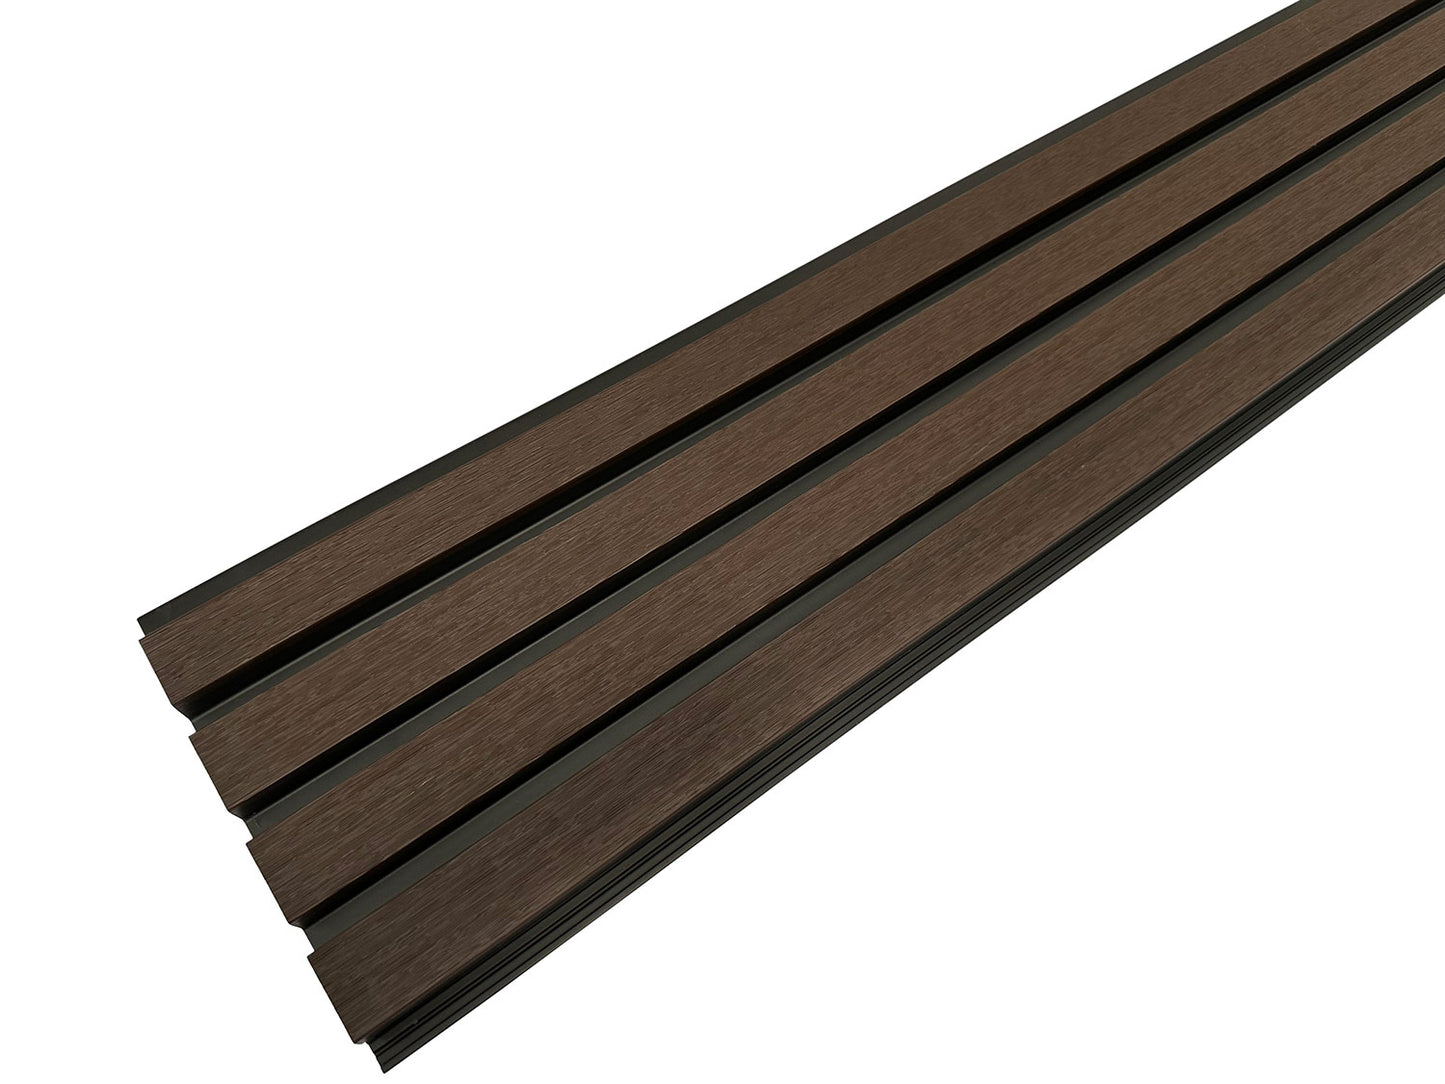 Dark Brown With Black Accents Exterior Slat Wall Paneling for Outdoors